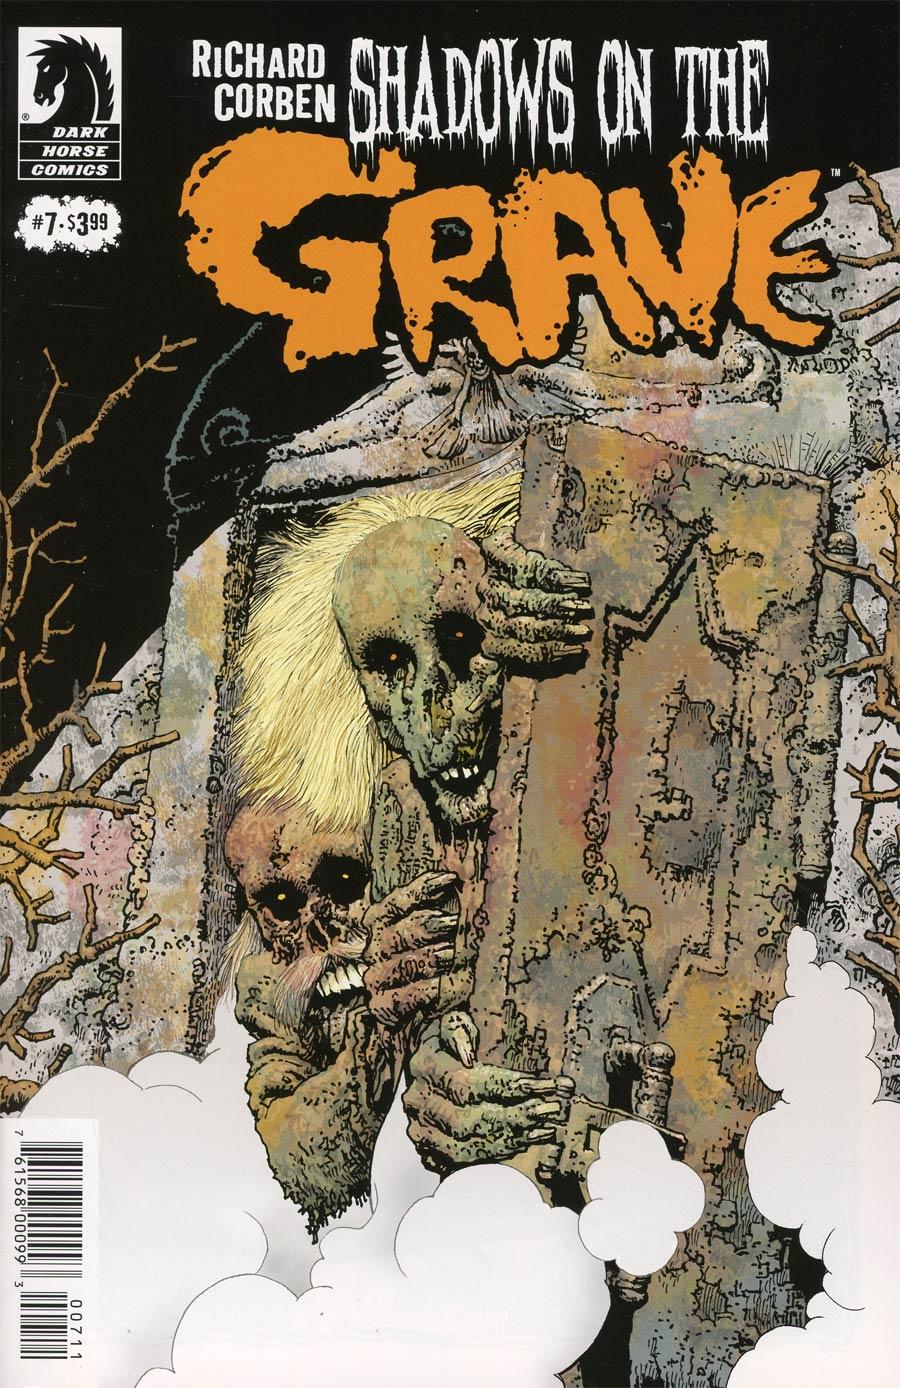 Shadows On The Grave Vol. 1 #7